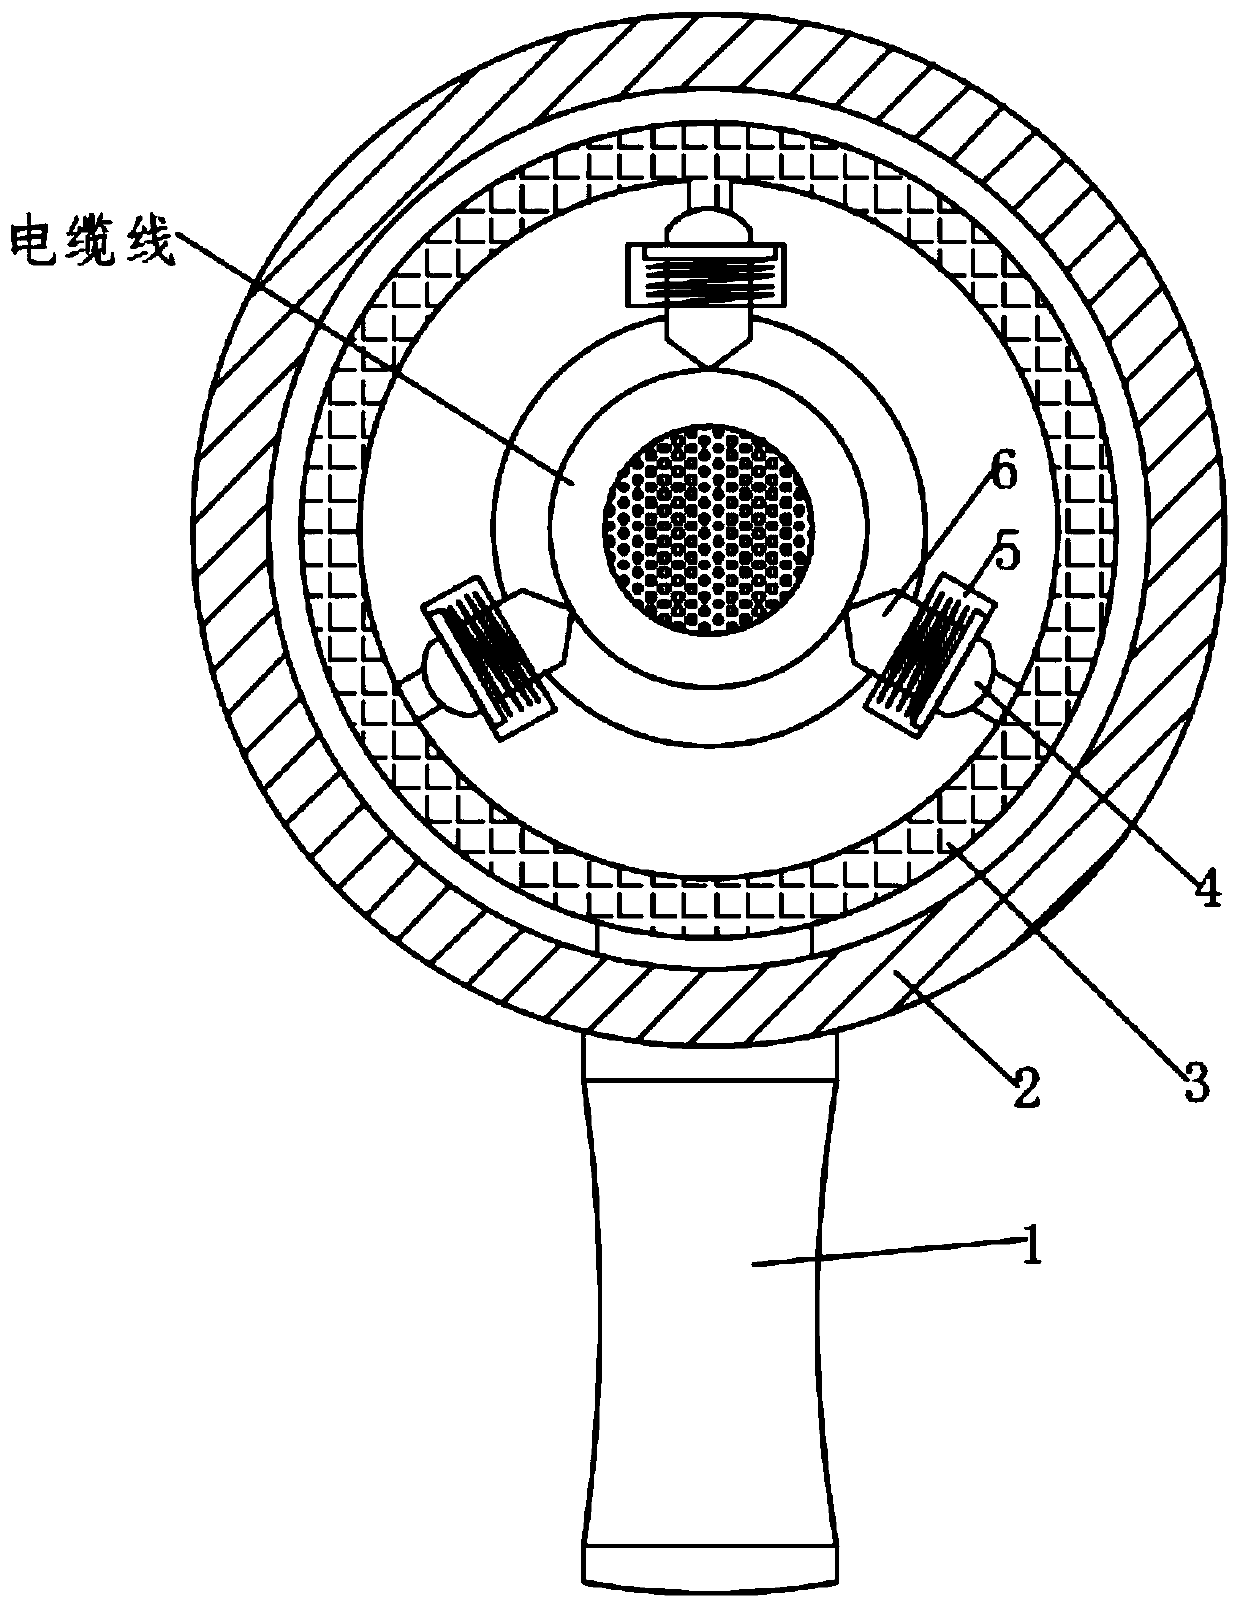 Cable joint peeling device for electric power